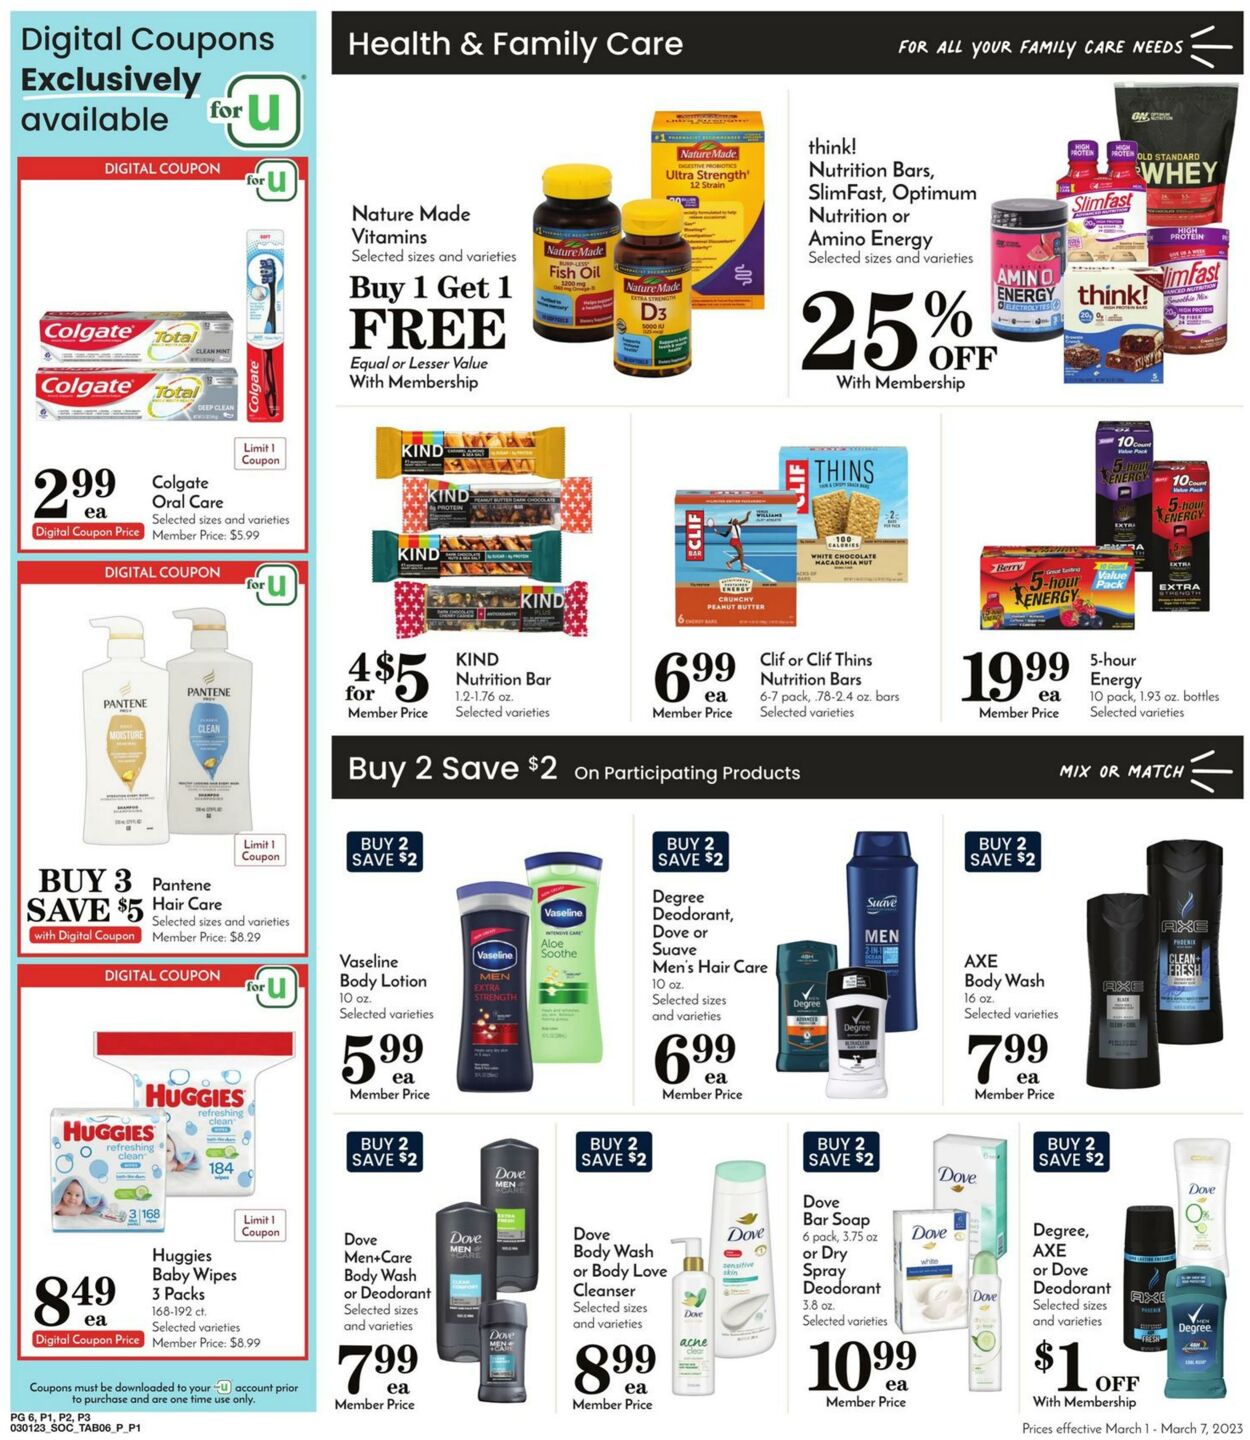 Weekly ad Pavilions 03/01/2023 - 03/07/2023